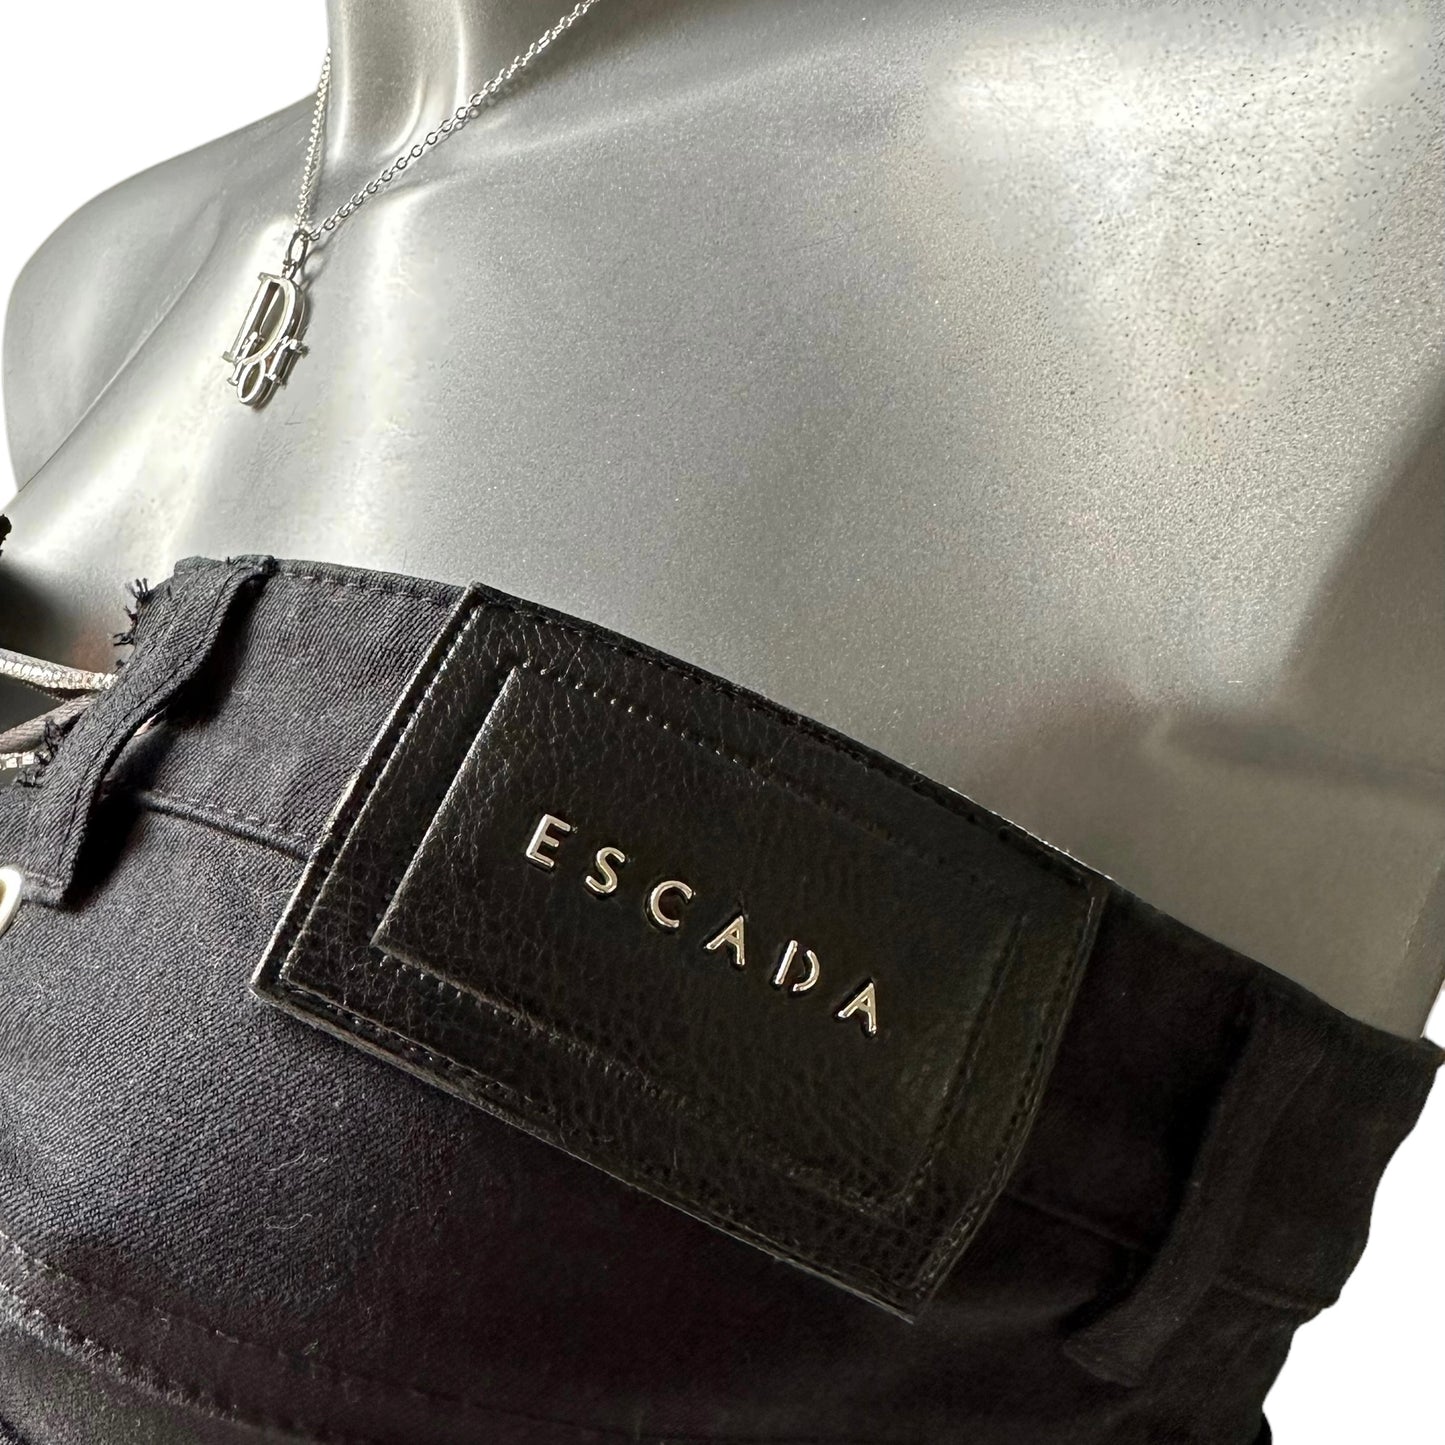 Authentic Escada Jeans Reworked into a Black Denim Corset Top with Crystal Lacing Small 6 8 10